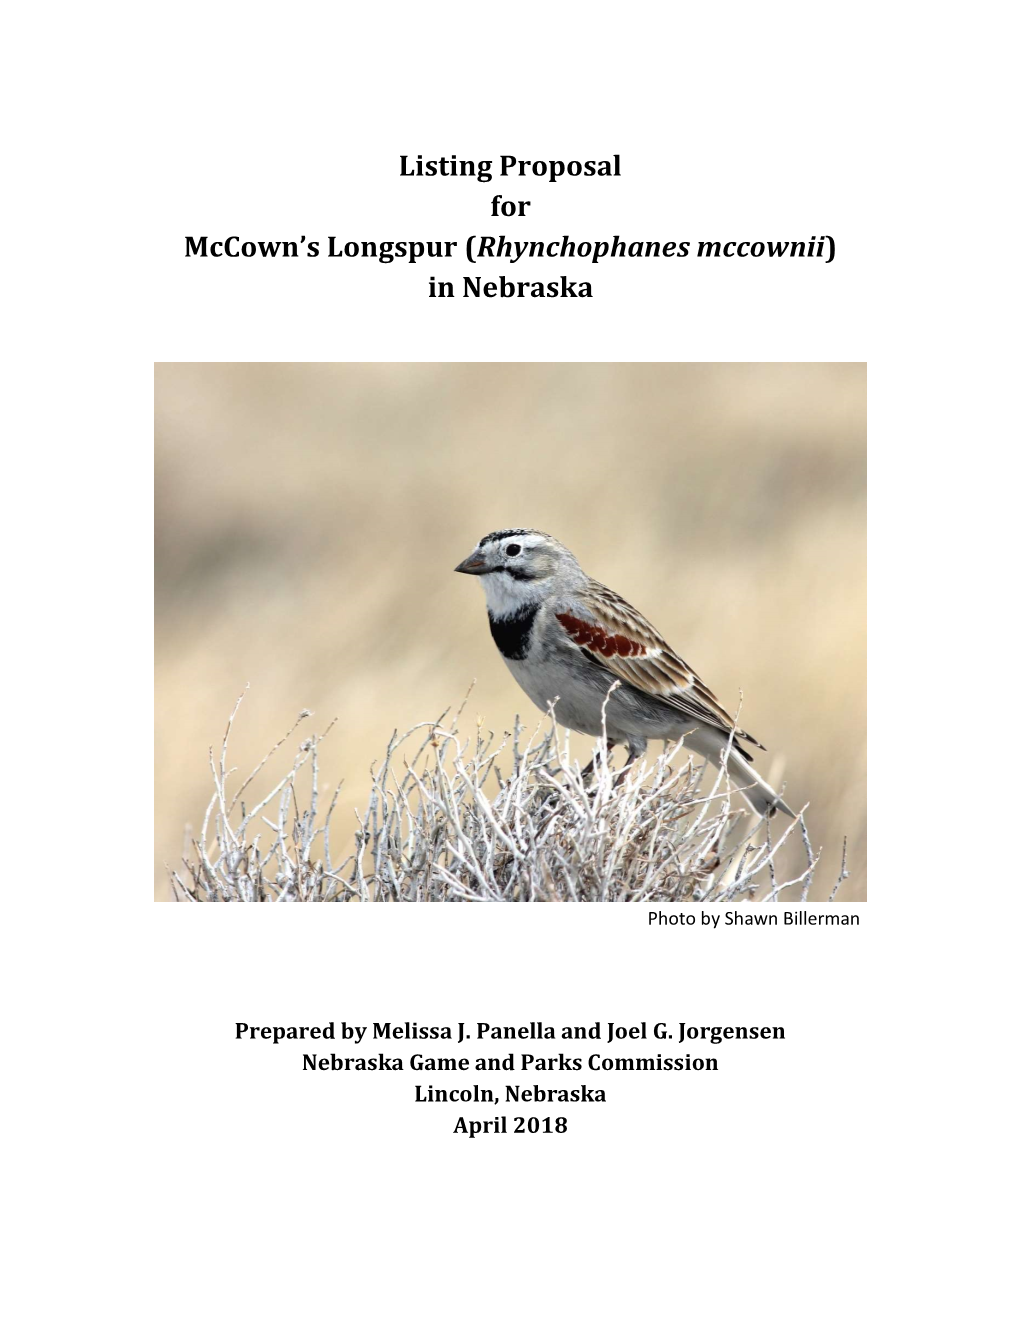 Listing Proposal for Mccown's Longspur